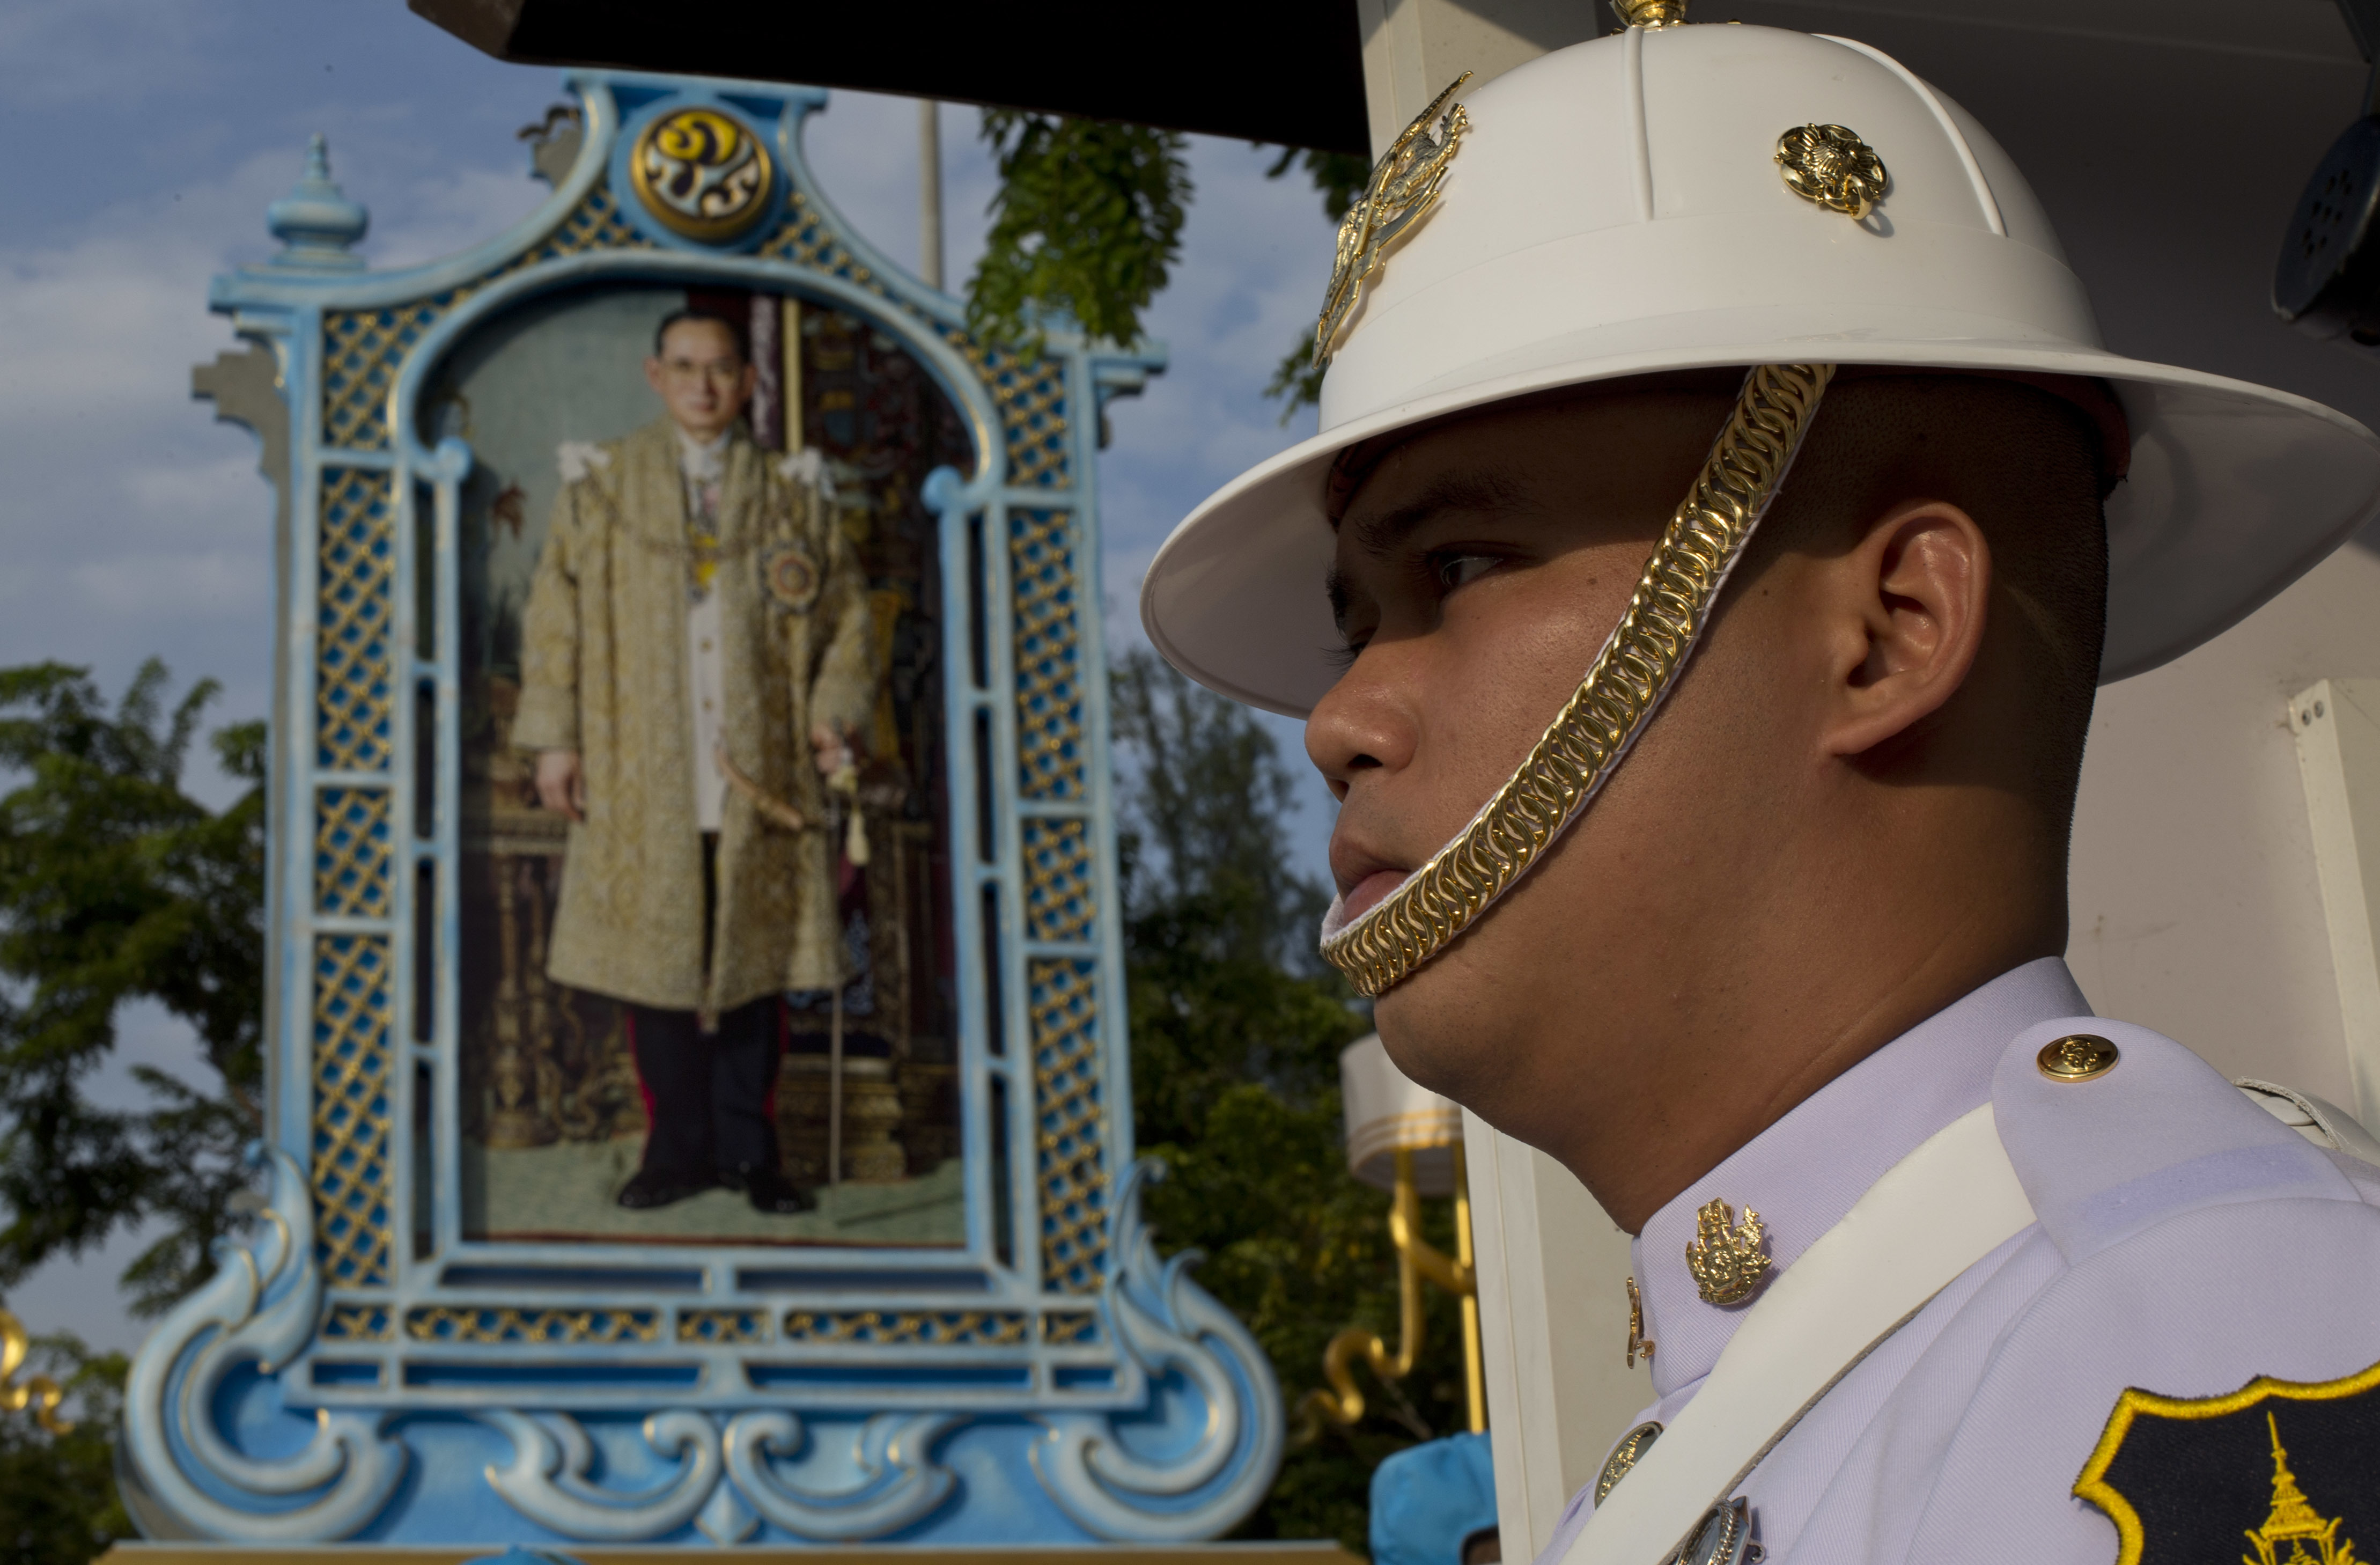 A Thai honor guard member stands in front of a portrait of late Thai King Bhumibol Adulyadej  in Bangkok, Thailand, Wednesday, Oct. 25, 2017. Thailand on Wednesday began an elaborate five-day funeral for King Bhumibol Adulyadej with his son, the new monarch, performing Buddhist merit-making rites in preparation for moving Bhumibol's remains to a spectacular golden crematorium. (AP Photo/Gemunu Amarasinghe)